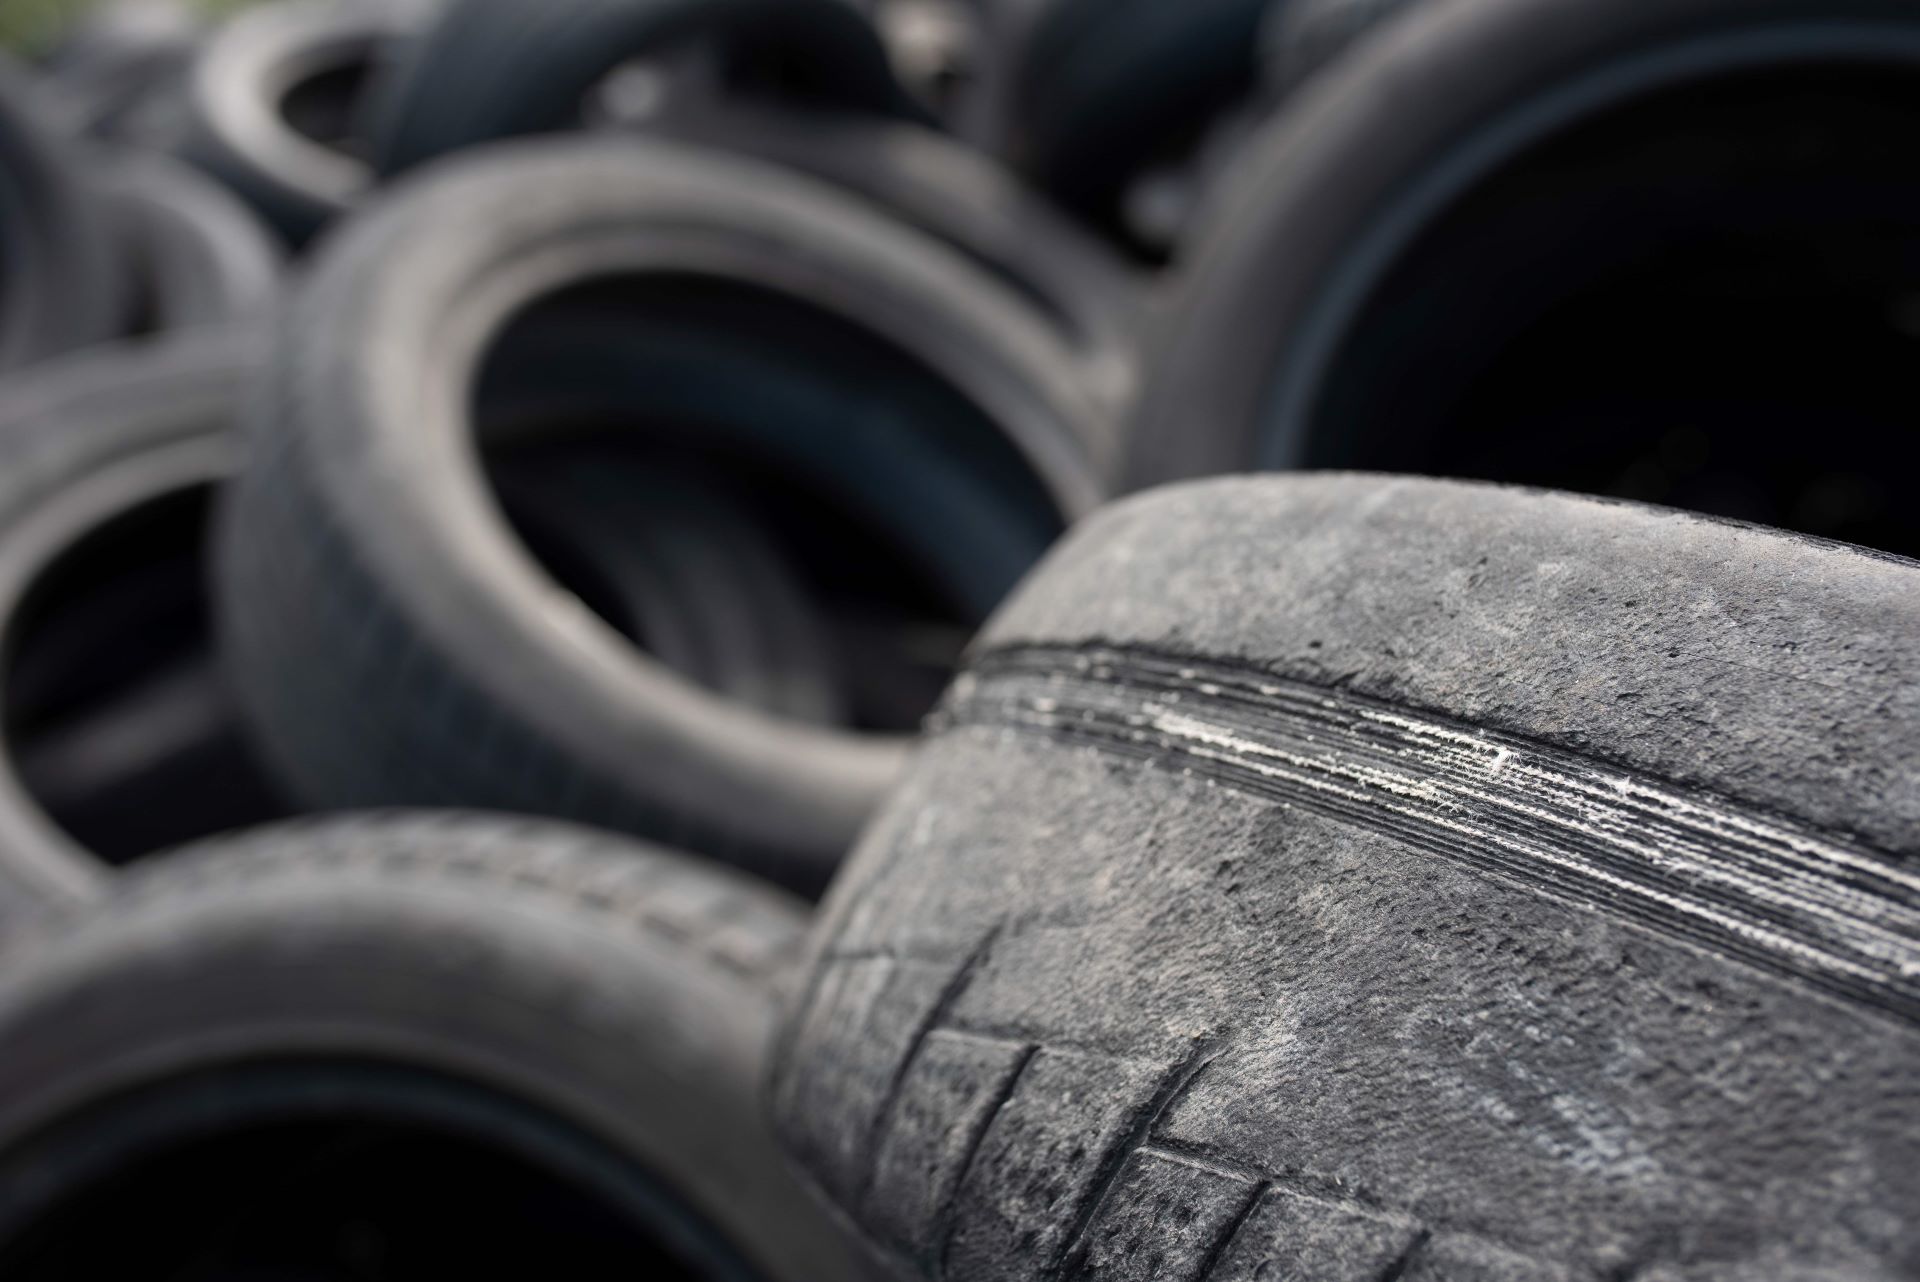 TEPA focuses on recycled waste tyre collection